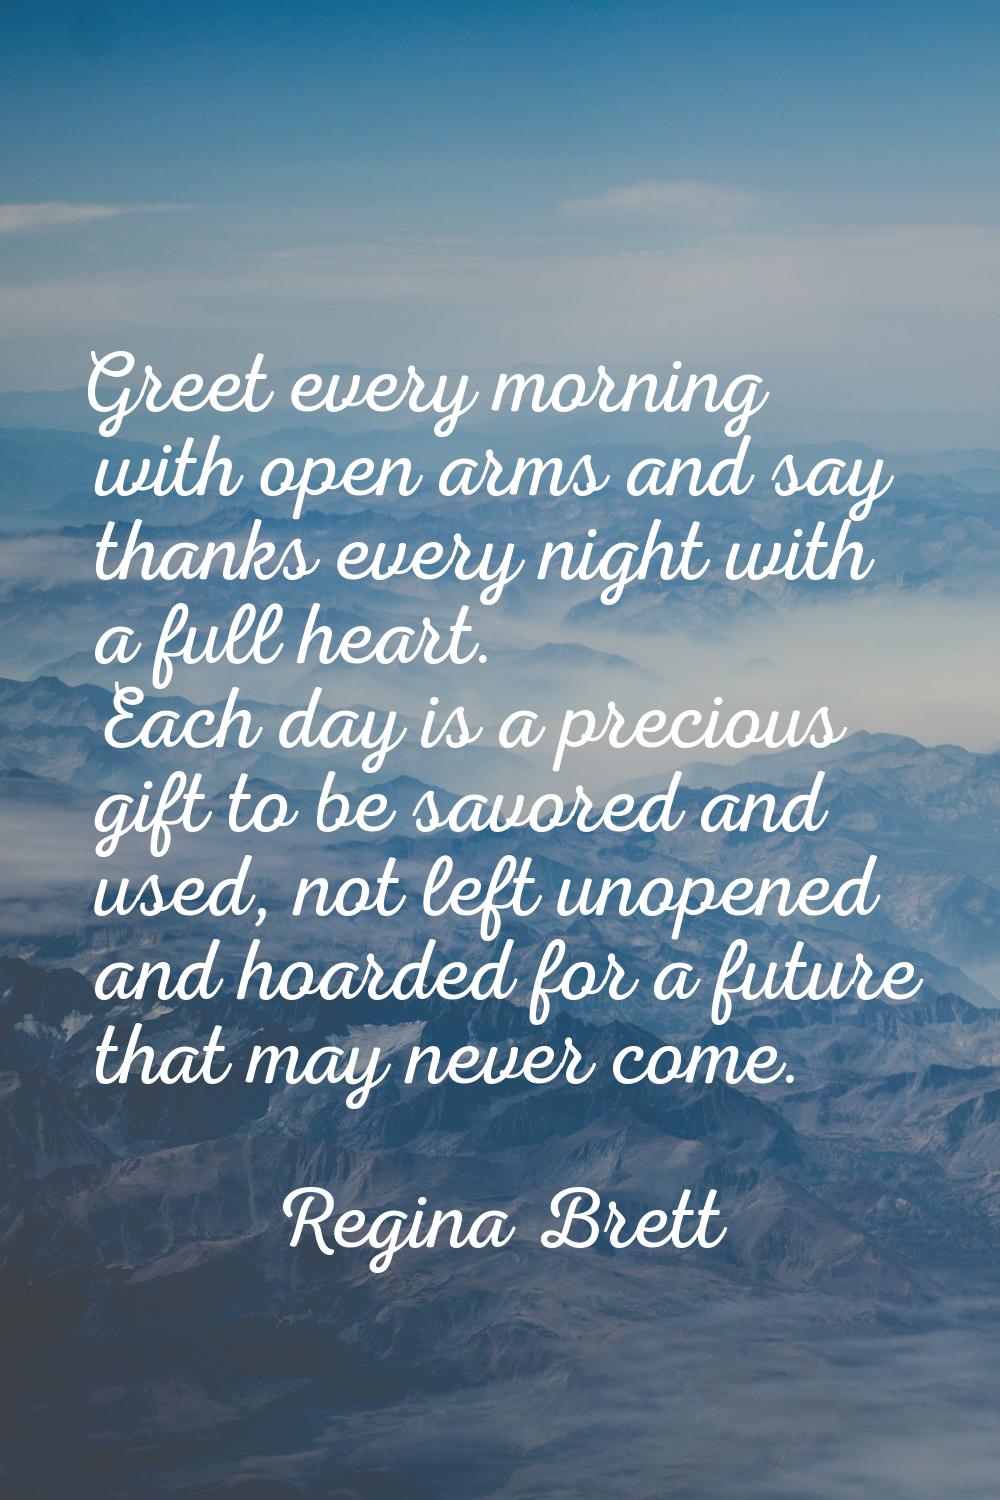 Greet every morning with open arms and say thanks every night with a full heart. Each day is a prec